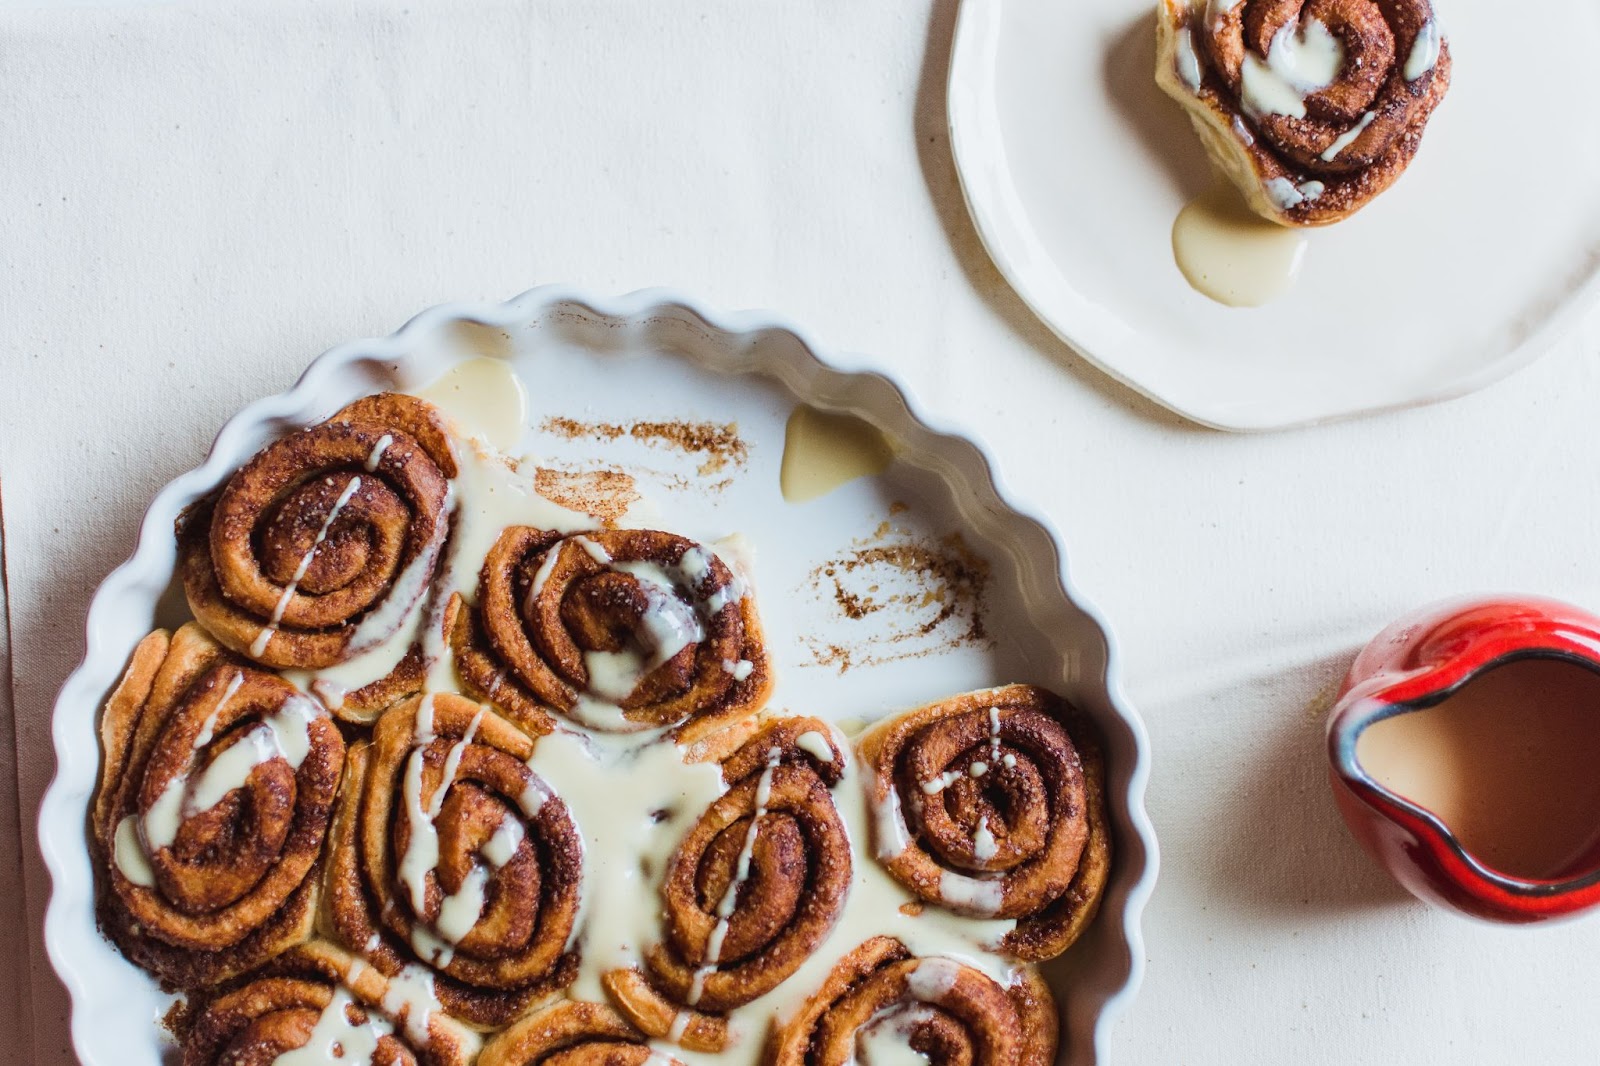 fresh cinnamon buns from one of kelowna's best bakeries, with drizzle on top